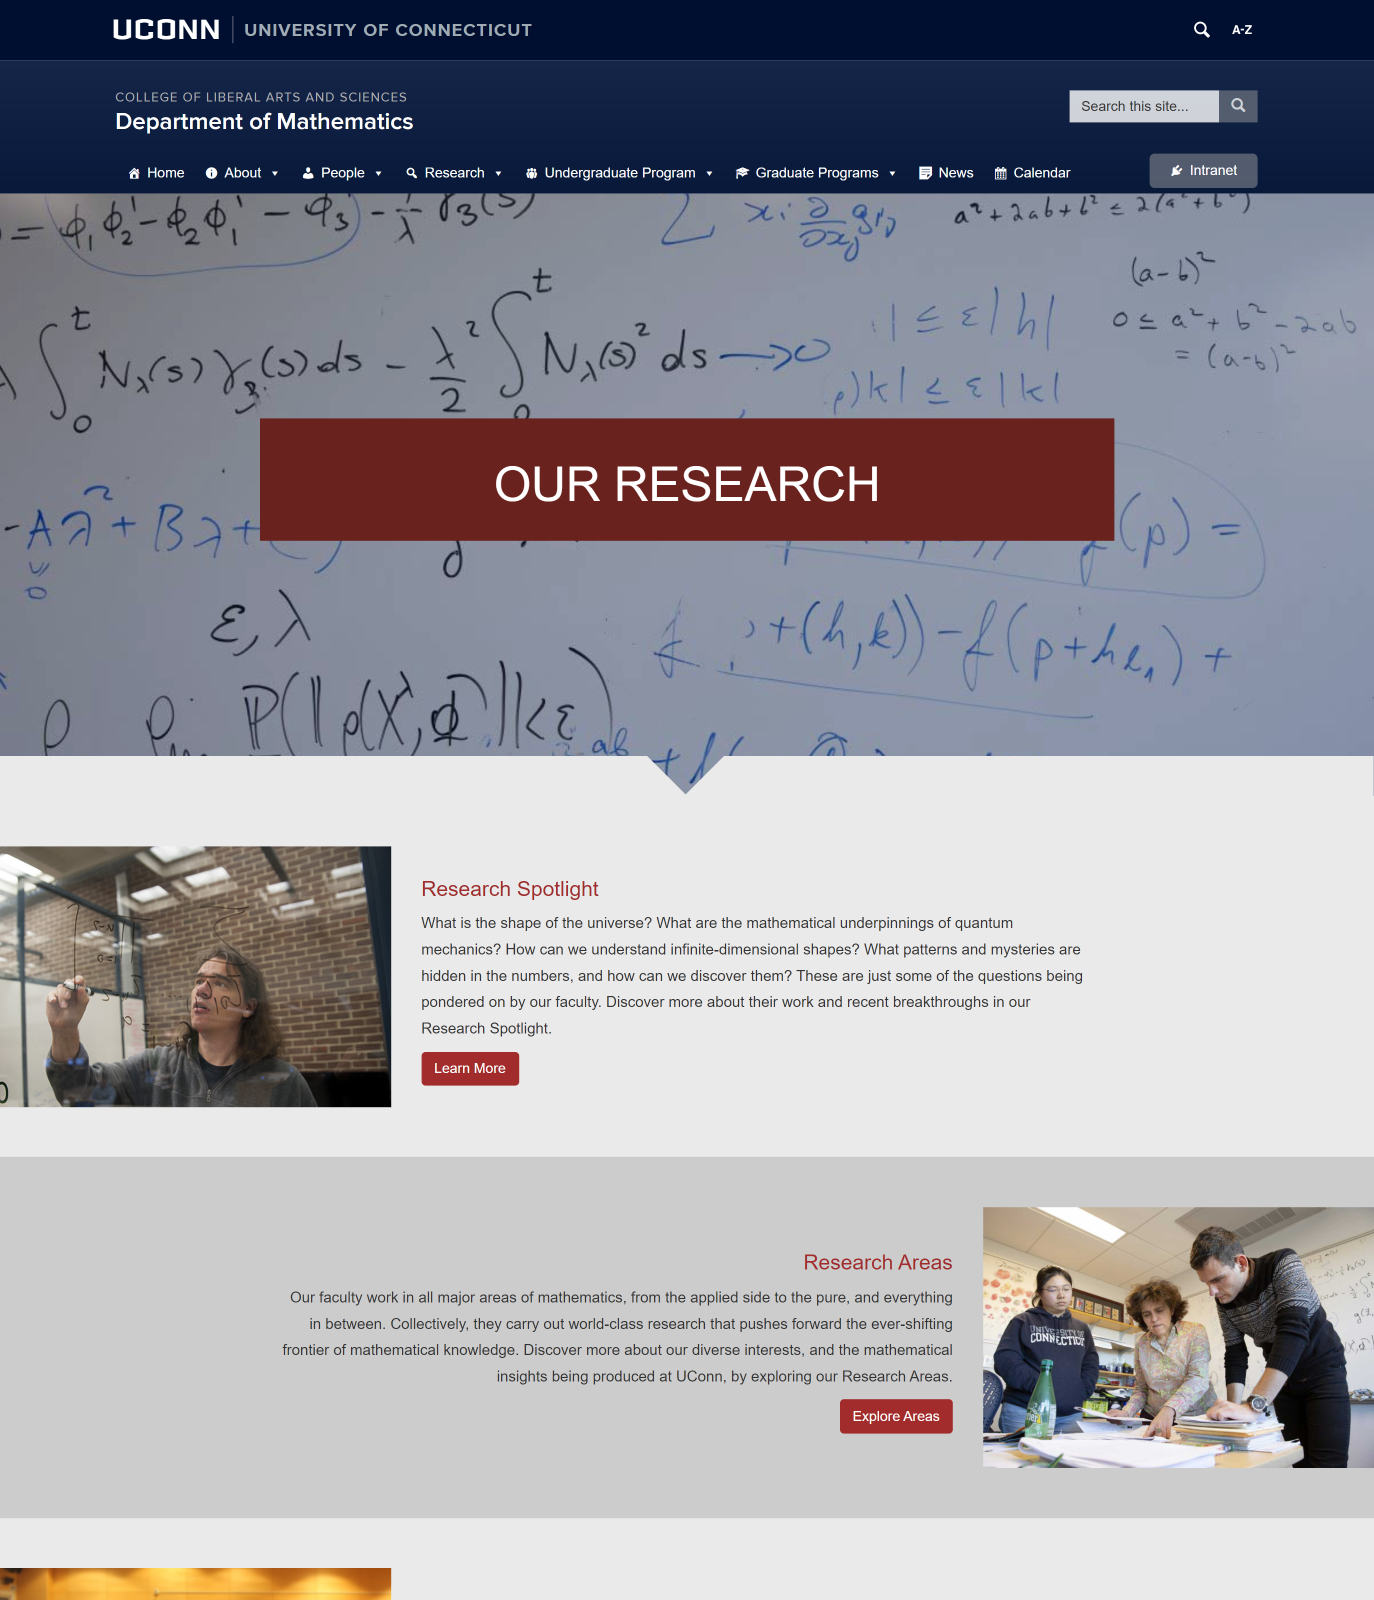 Screenshot of an interior page of the Department of Mathematics website